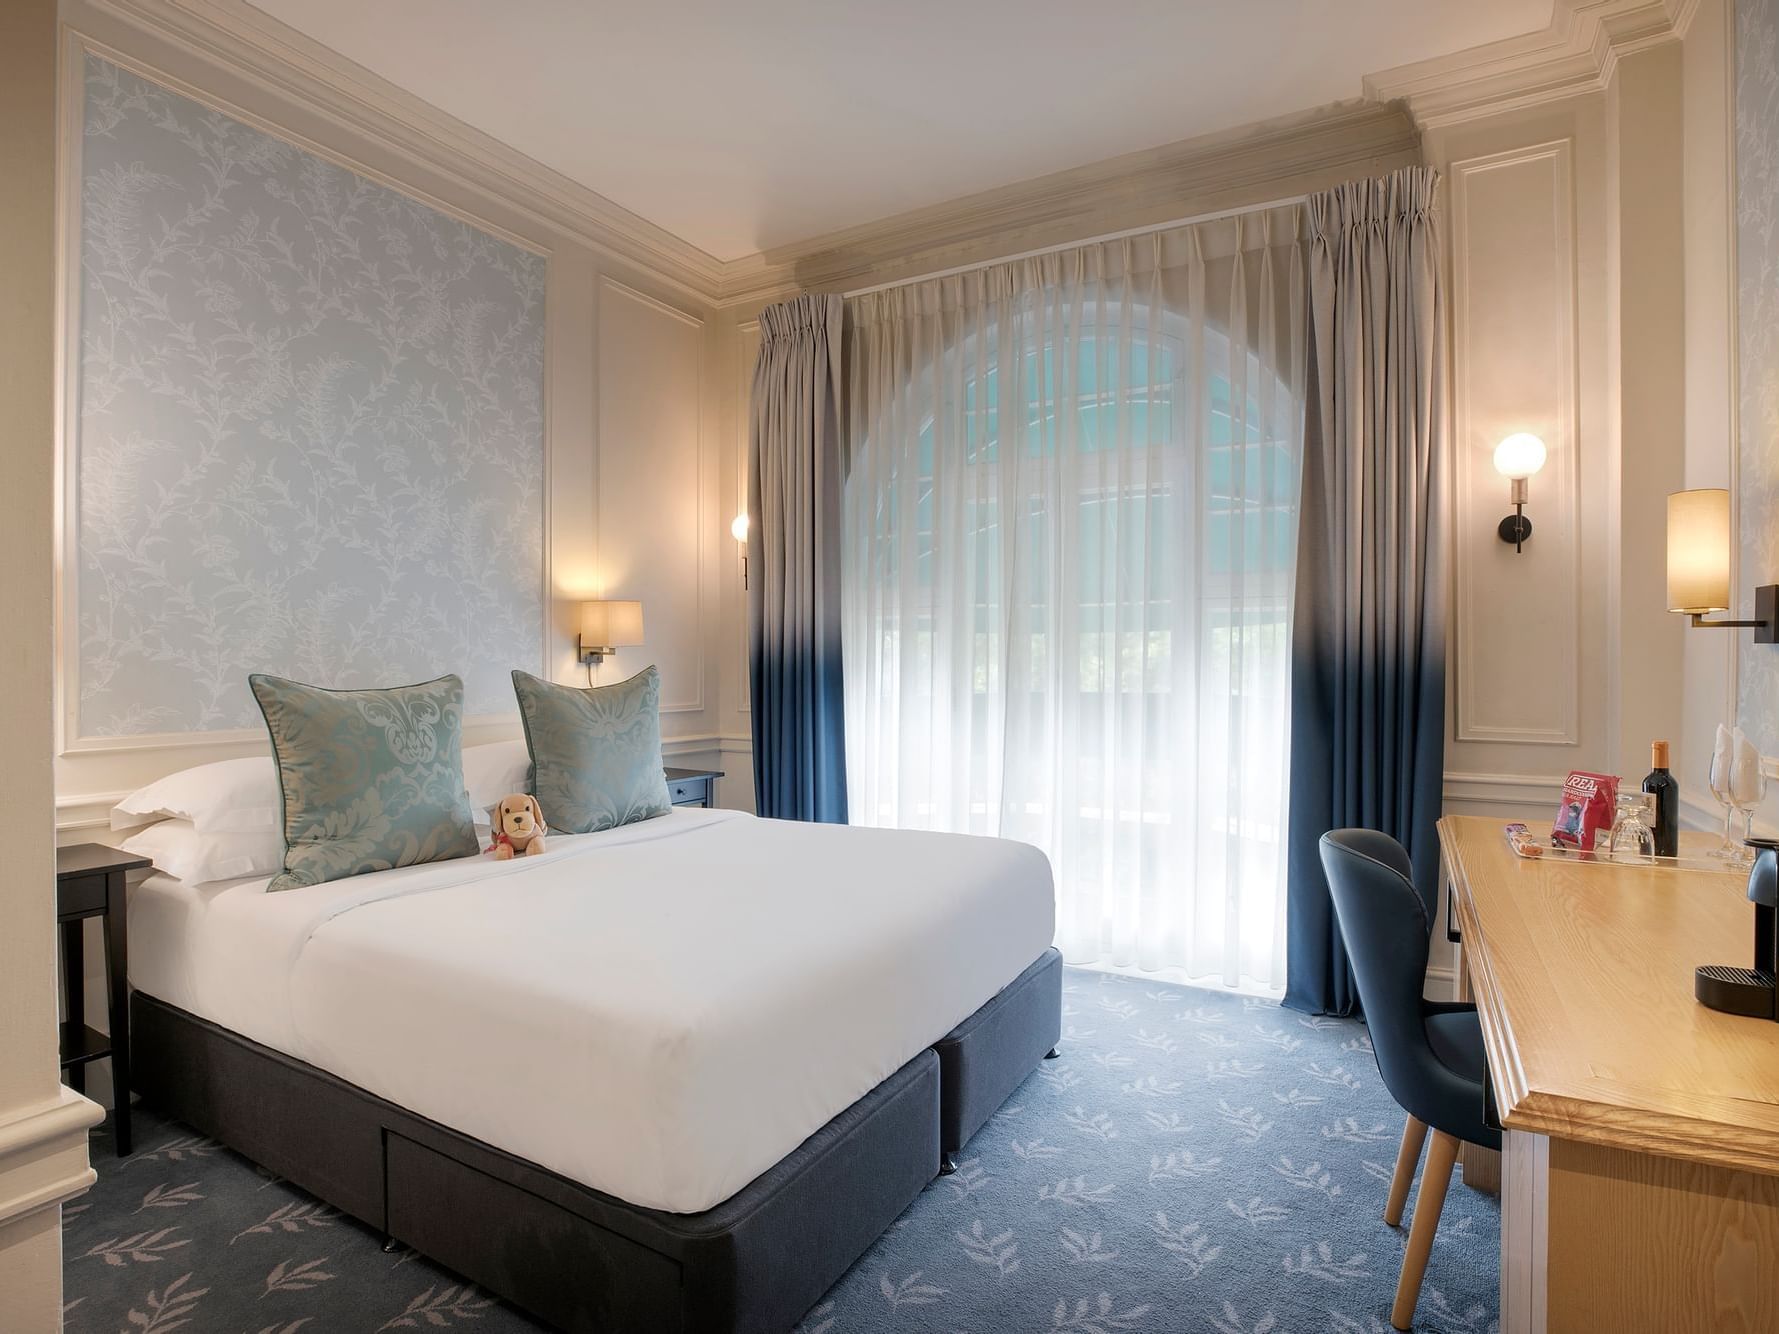 Interior of Double Room at Sloane Square Hotel